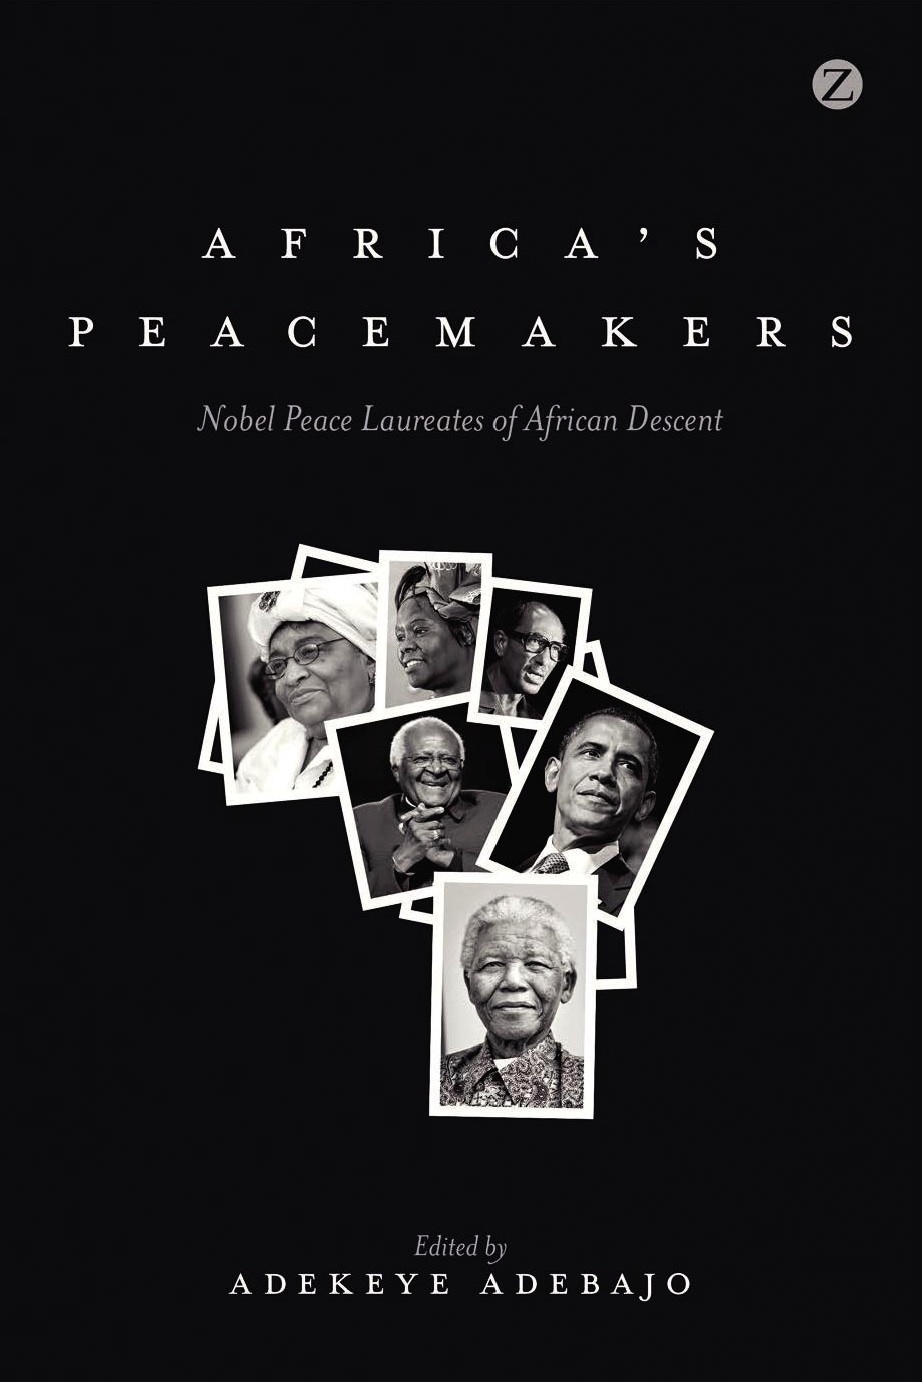 Africa's peacemakers: Nobel peacemakers of African descent 's image